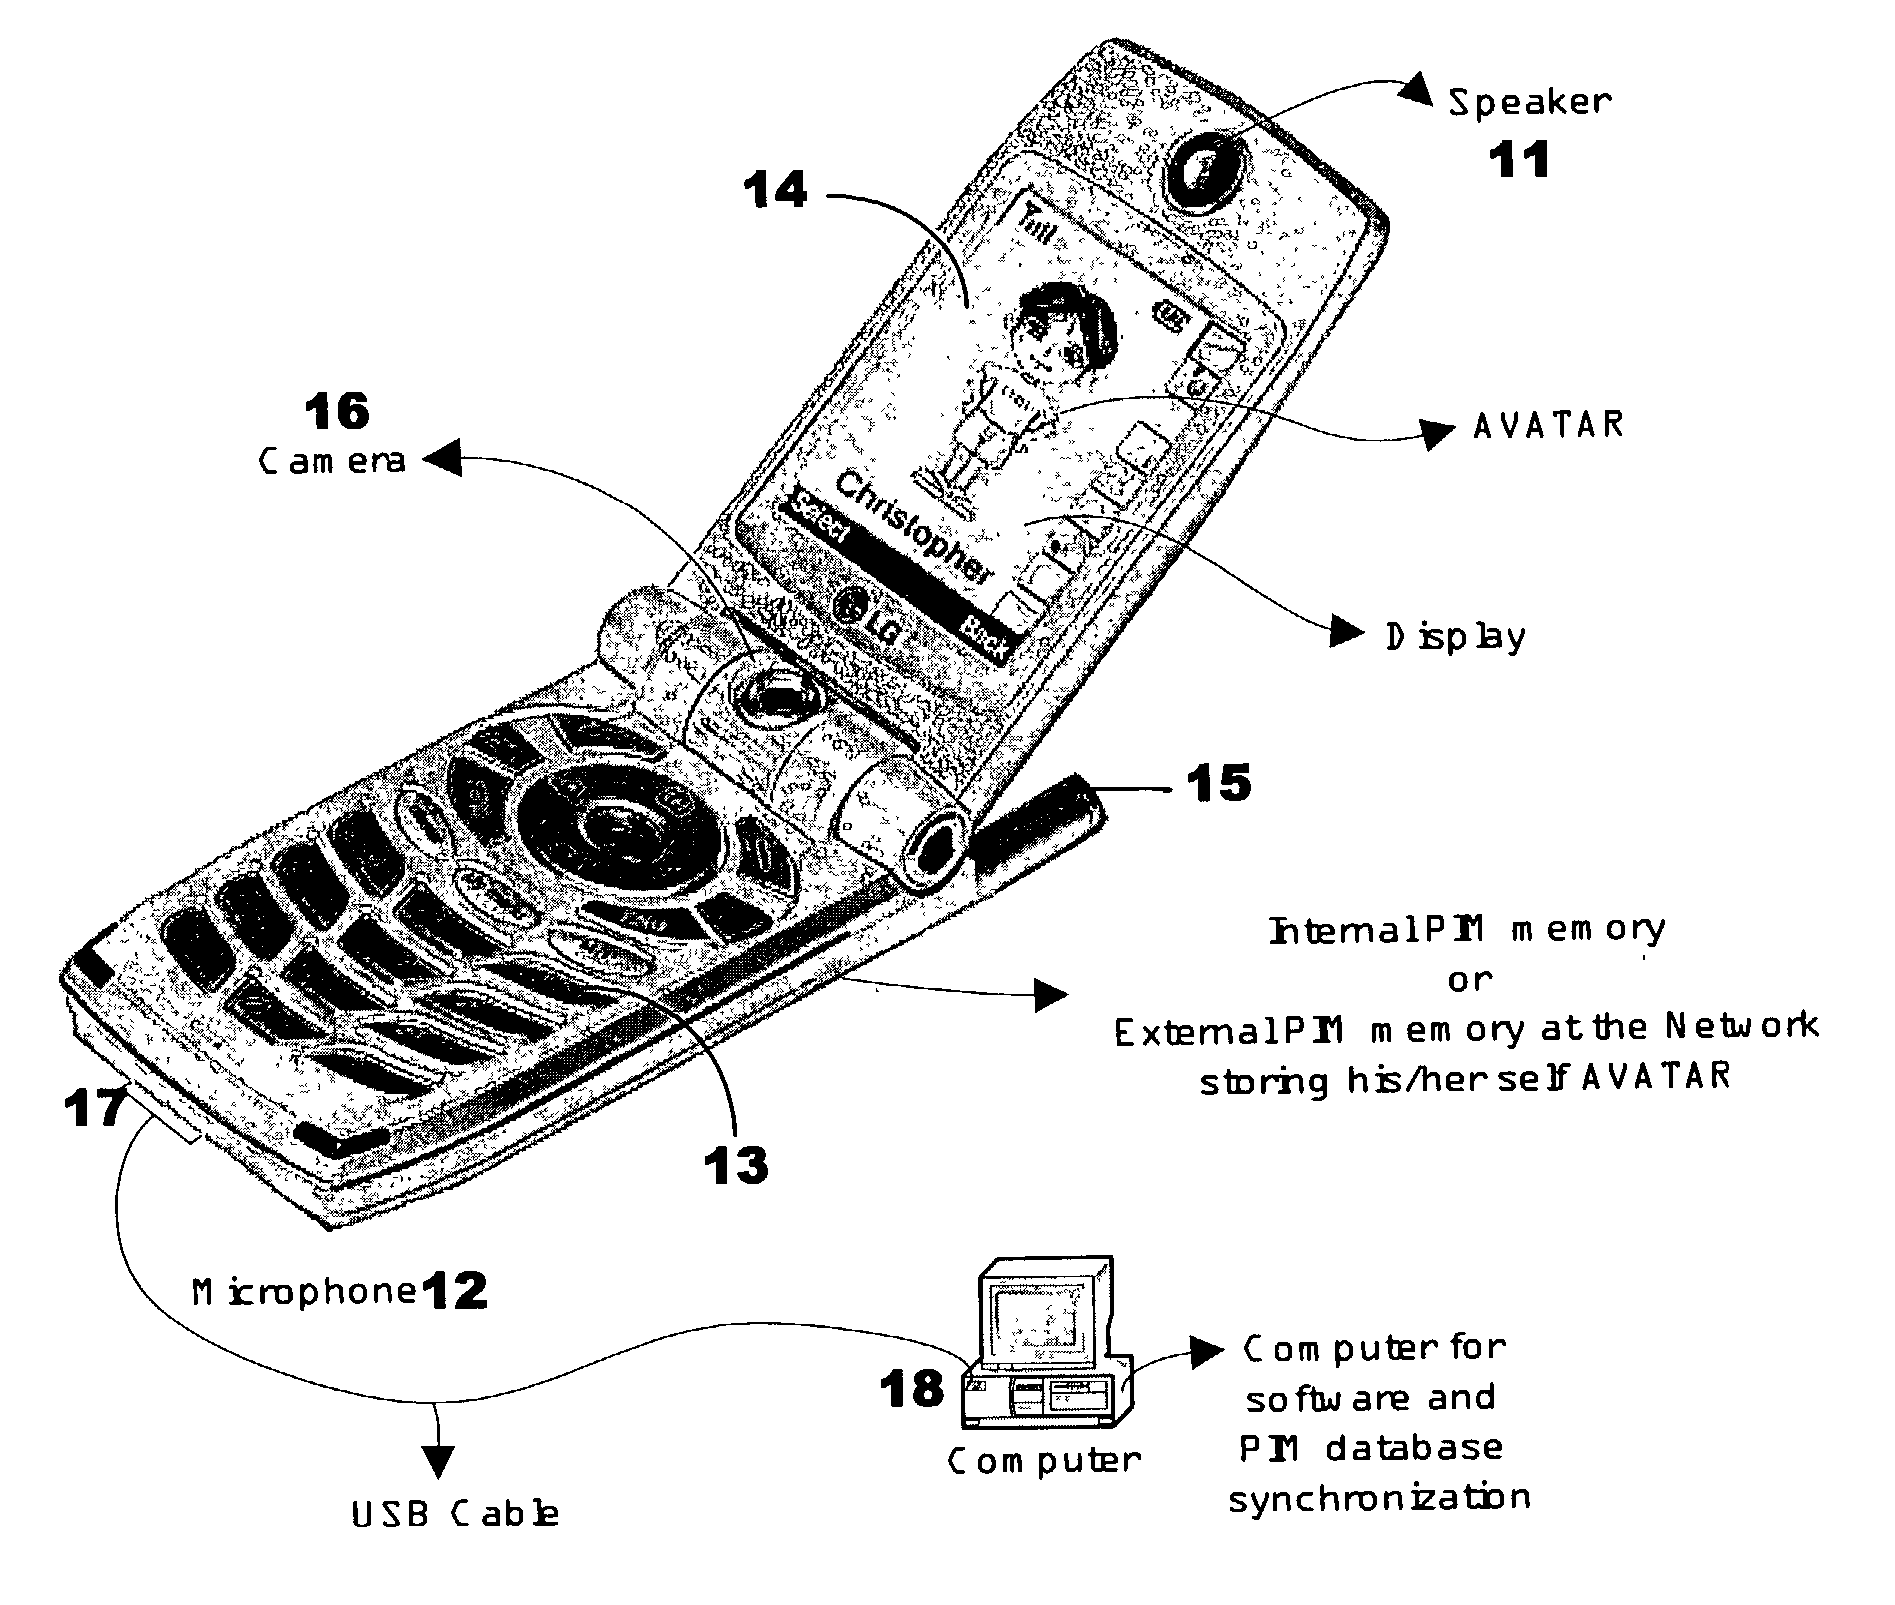 System and method for multiplexing media information over a network using reduced communications resources and prior knowledge/experience of a called or calling party